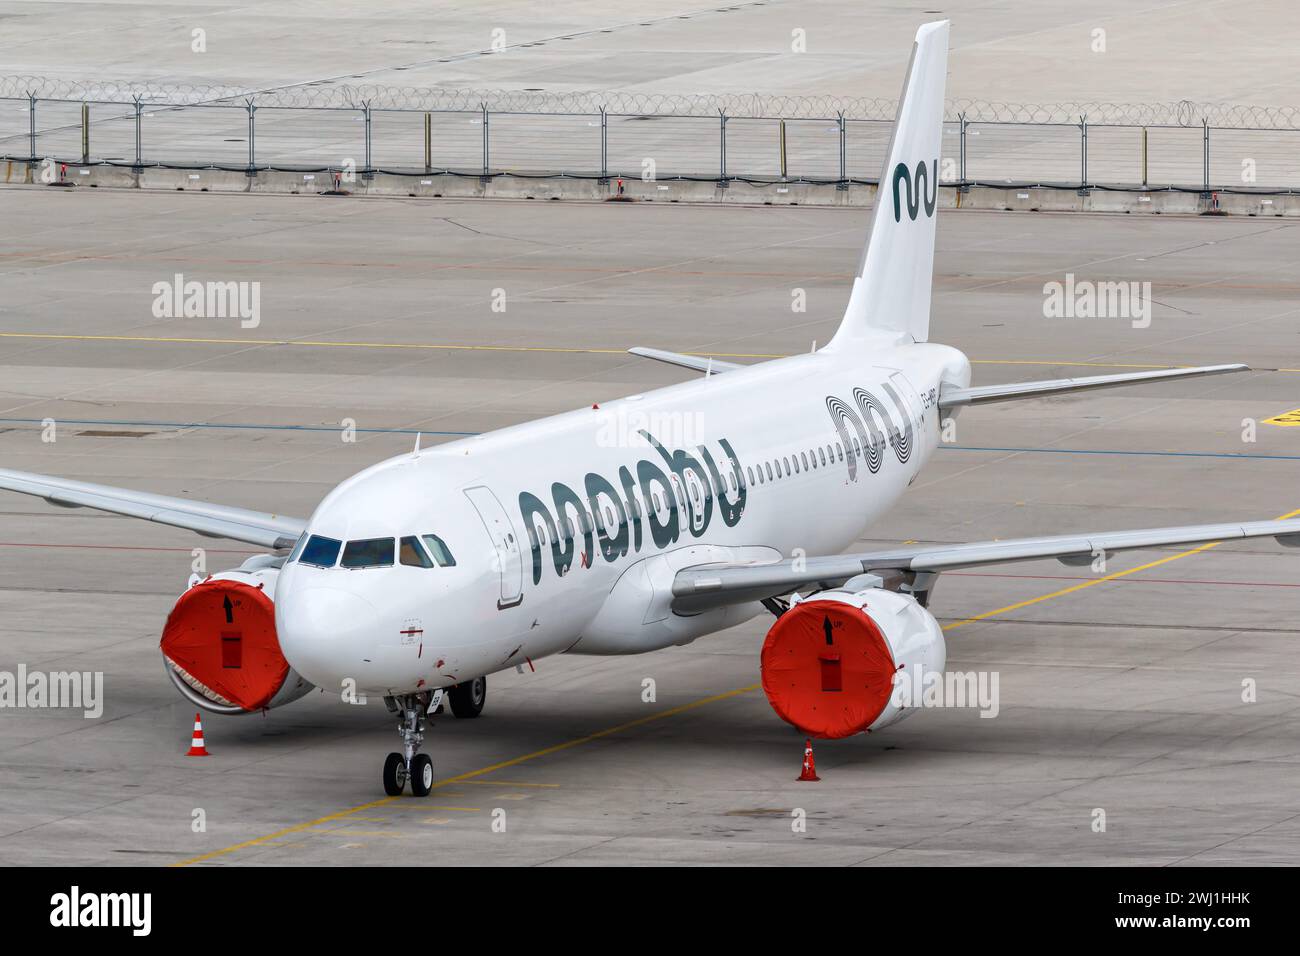 Marabu Airlines Airbus A320neo aircraft Munich Airport in Germany Stock Photo